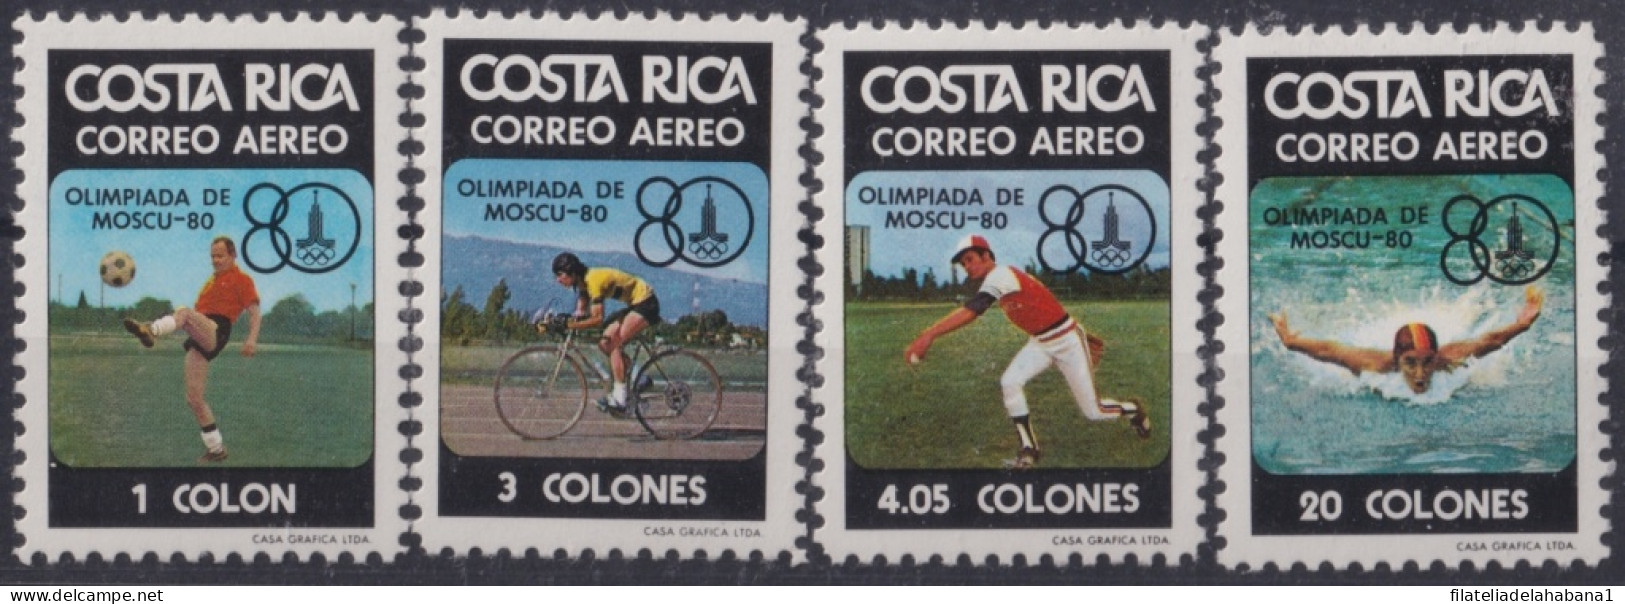 F-EX50099 COSTA RICA MNH 1980 MOSCOW OLYMPIC GAMES CICLING SOCCER BASEBALL.          - Ete 1980: Moscou